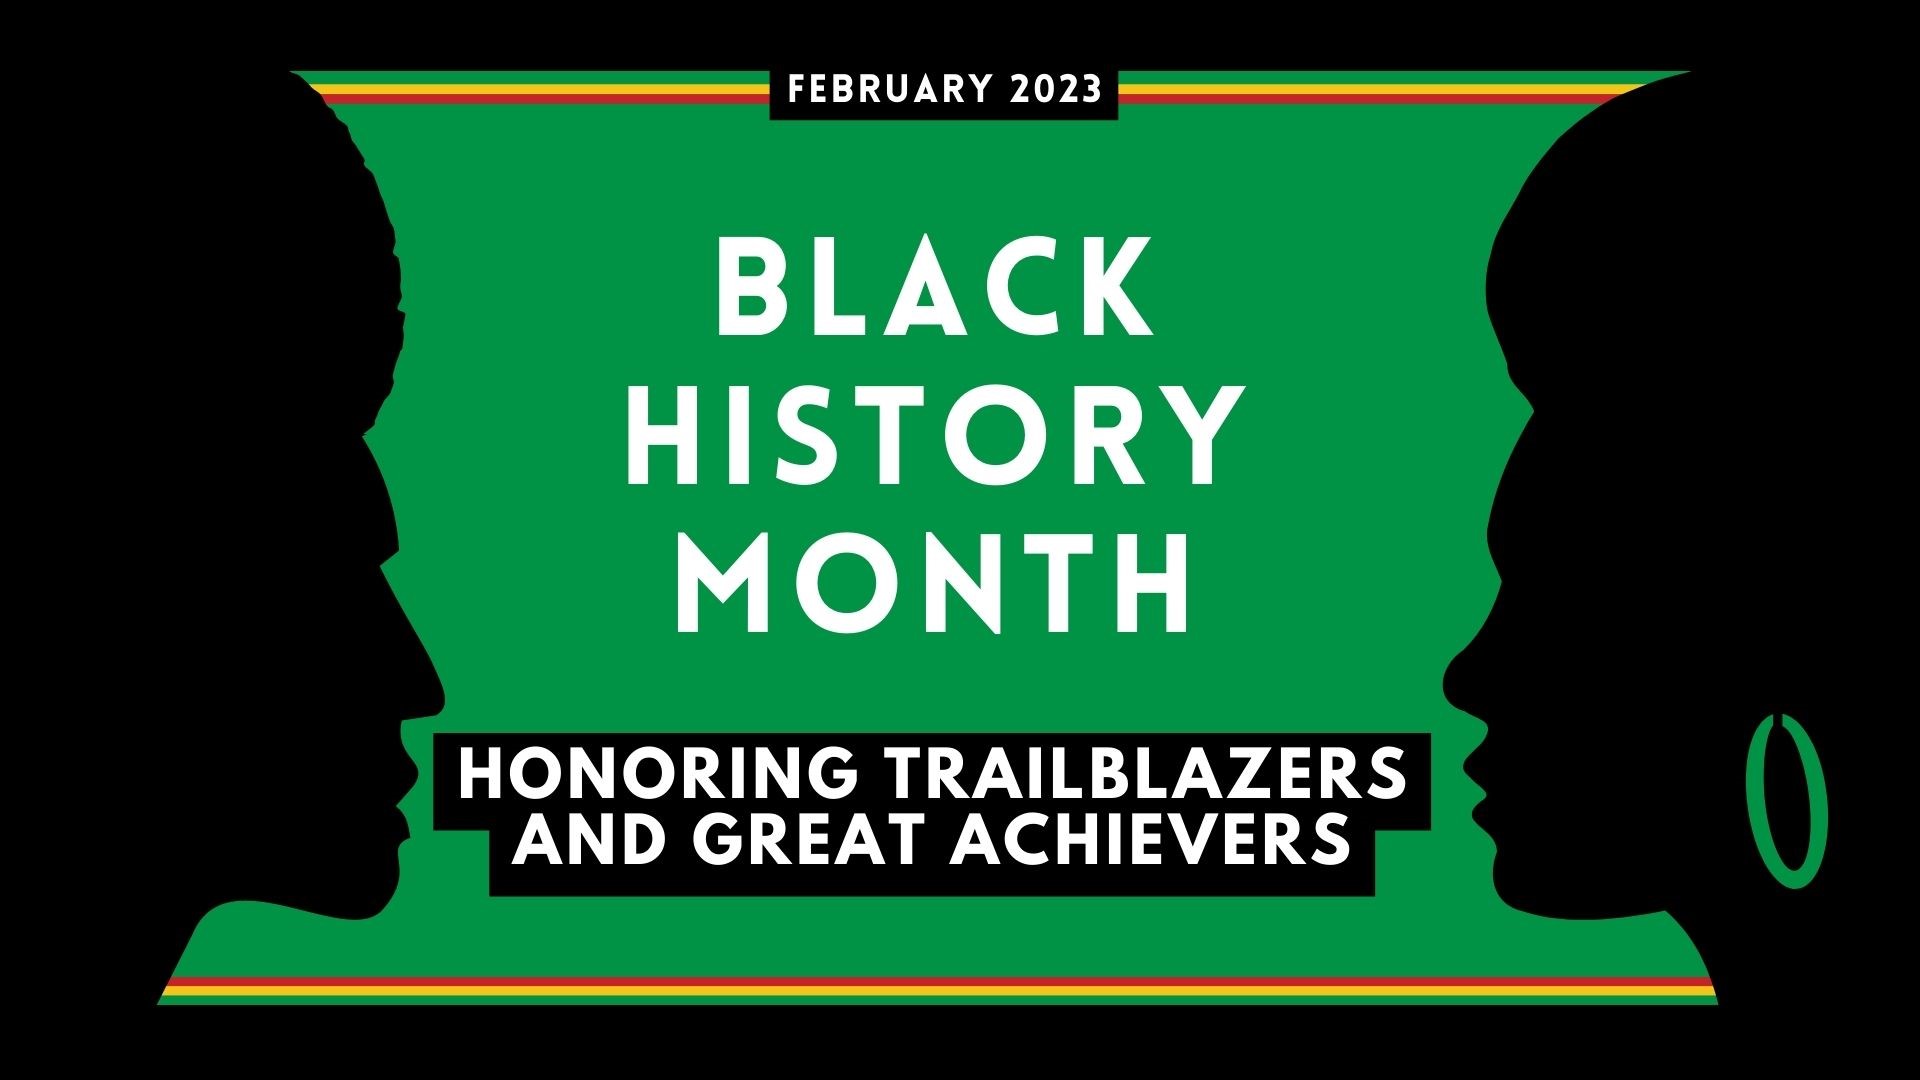 A collection of spotlight stories on notable African Americans and their achievements as we celebrate Black History Month.